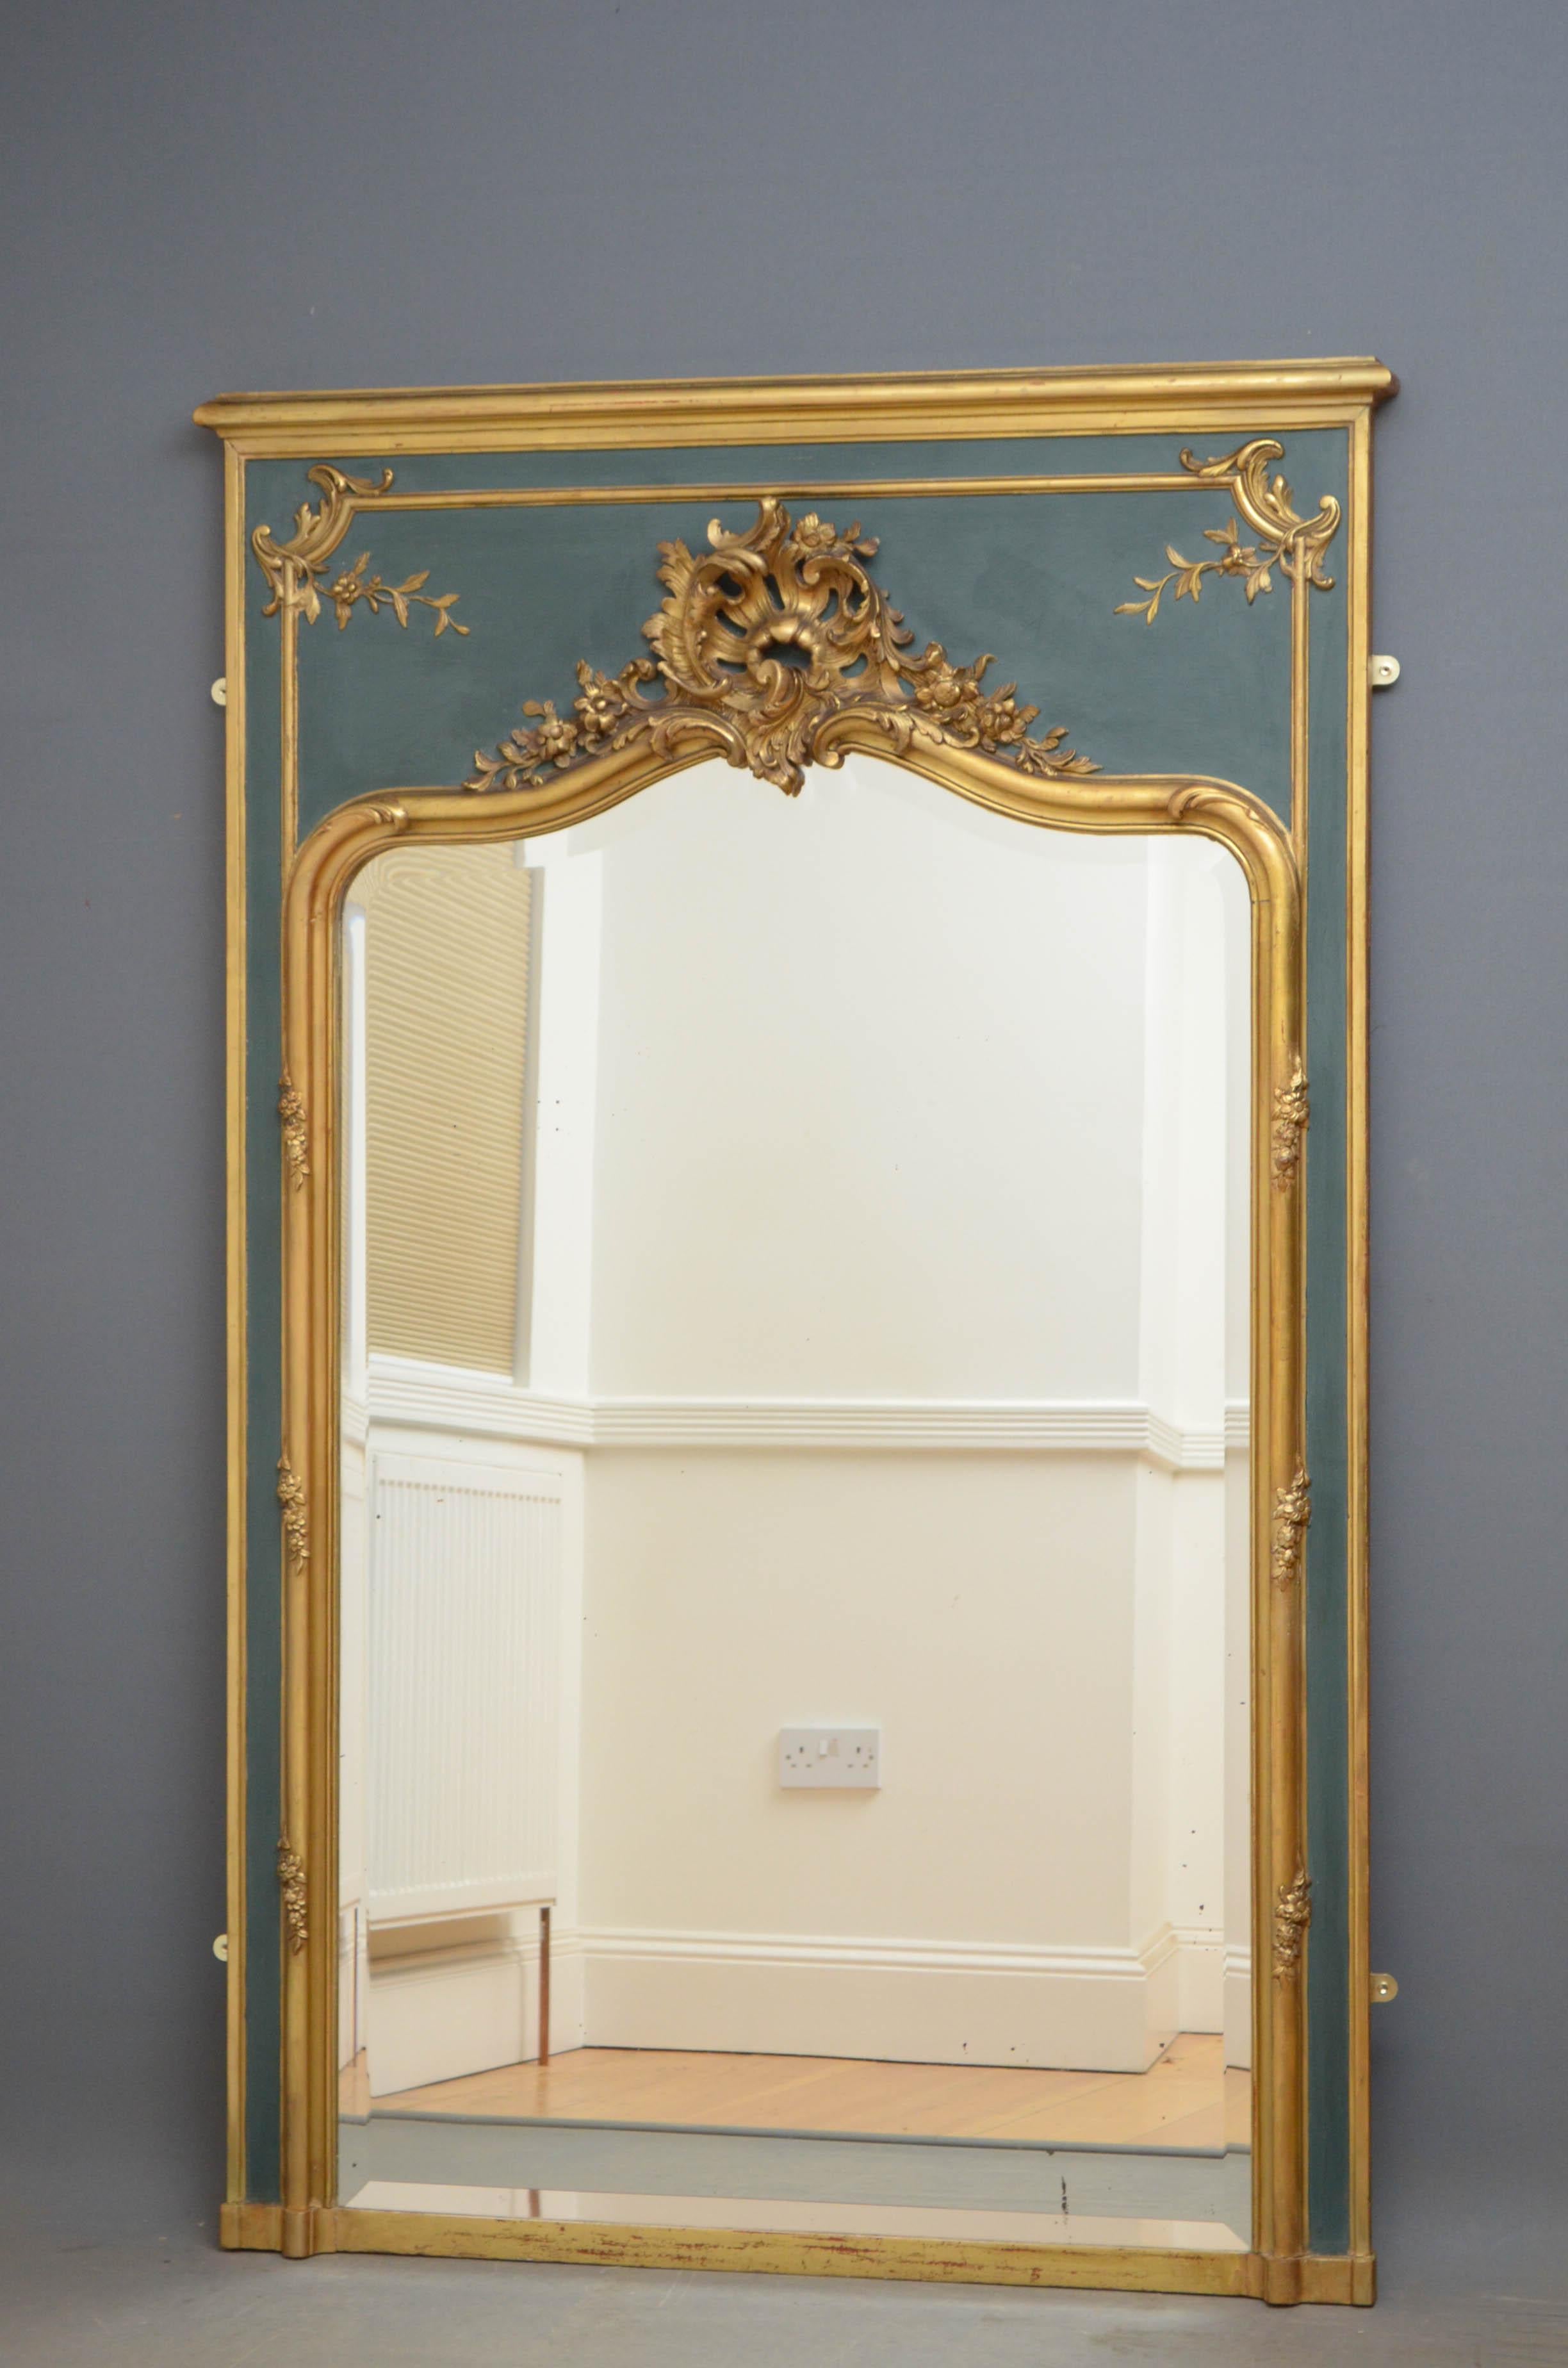 Sn4760 elegant French floor standing or wall hanging mirror, having original bevelled edge mirror with some foxing in gilded frame with floral crest to top on the dark green backdrop.
This antique is in excellent home ready condition, circa